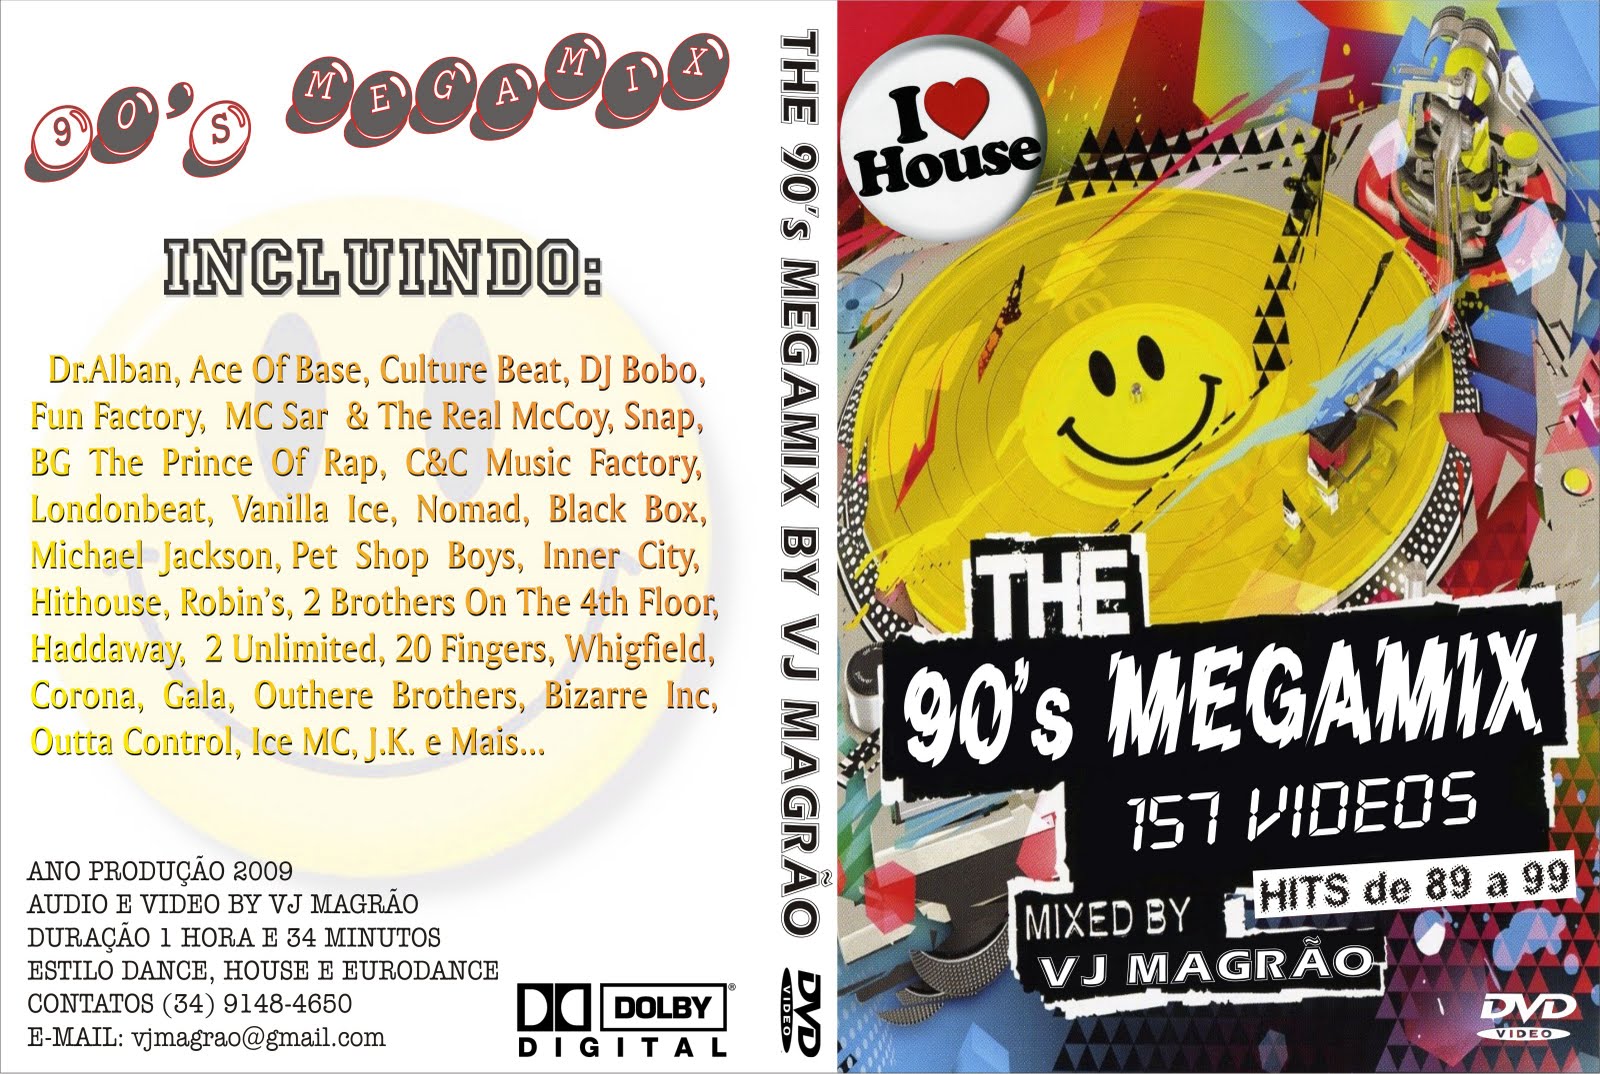 90's Video-Megamix by Dj Magrao (Dvd-rip)